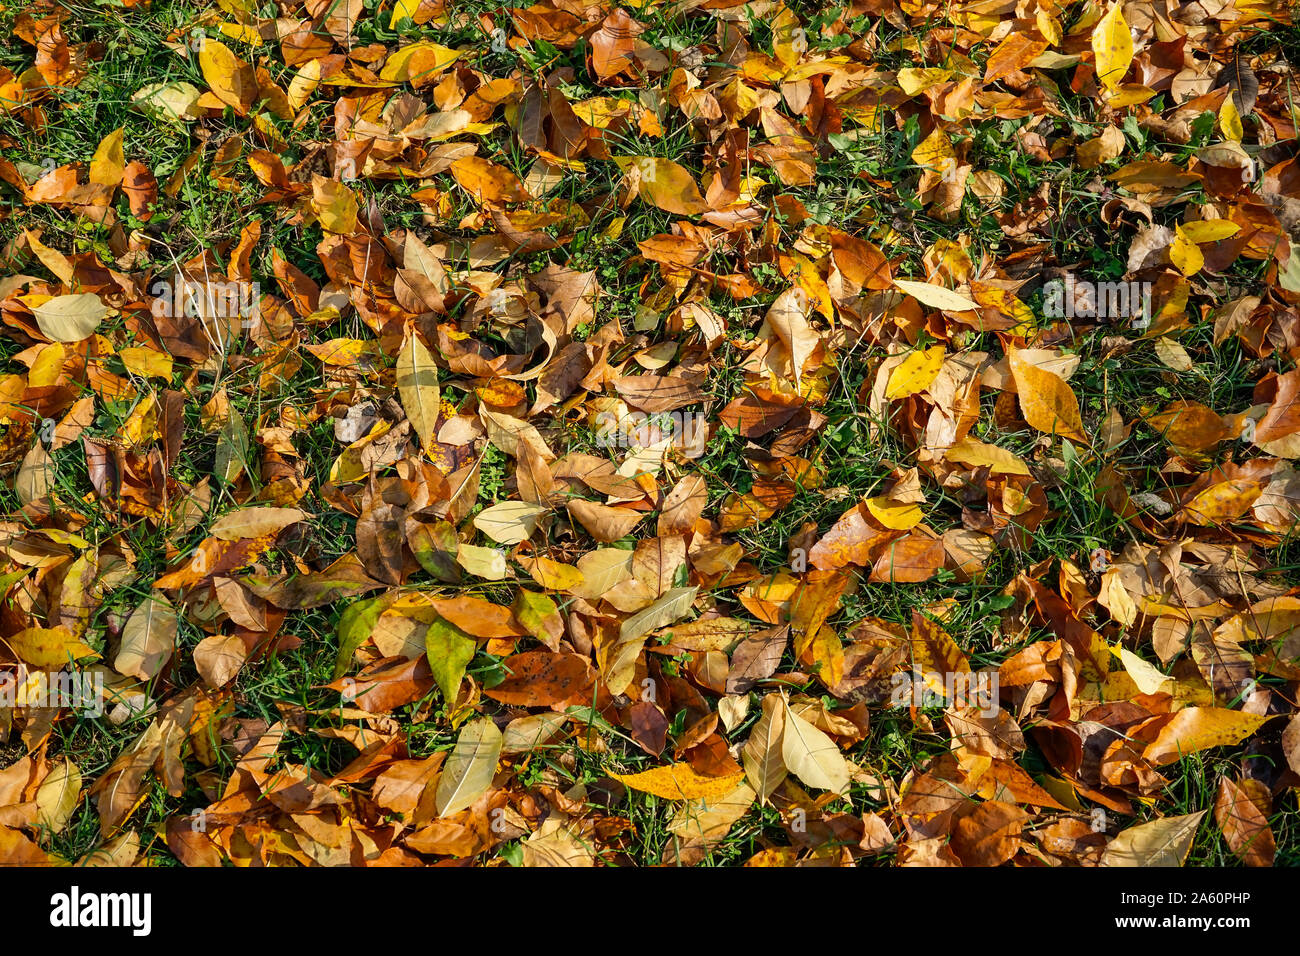 Autumn or fall natural background with a carpet of dead leaves from various species of trees fallen over grass in late October , temperate climate Stock Photo